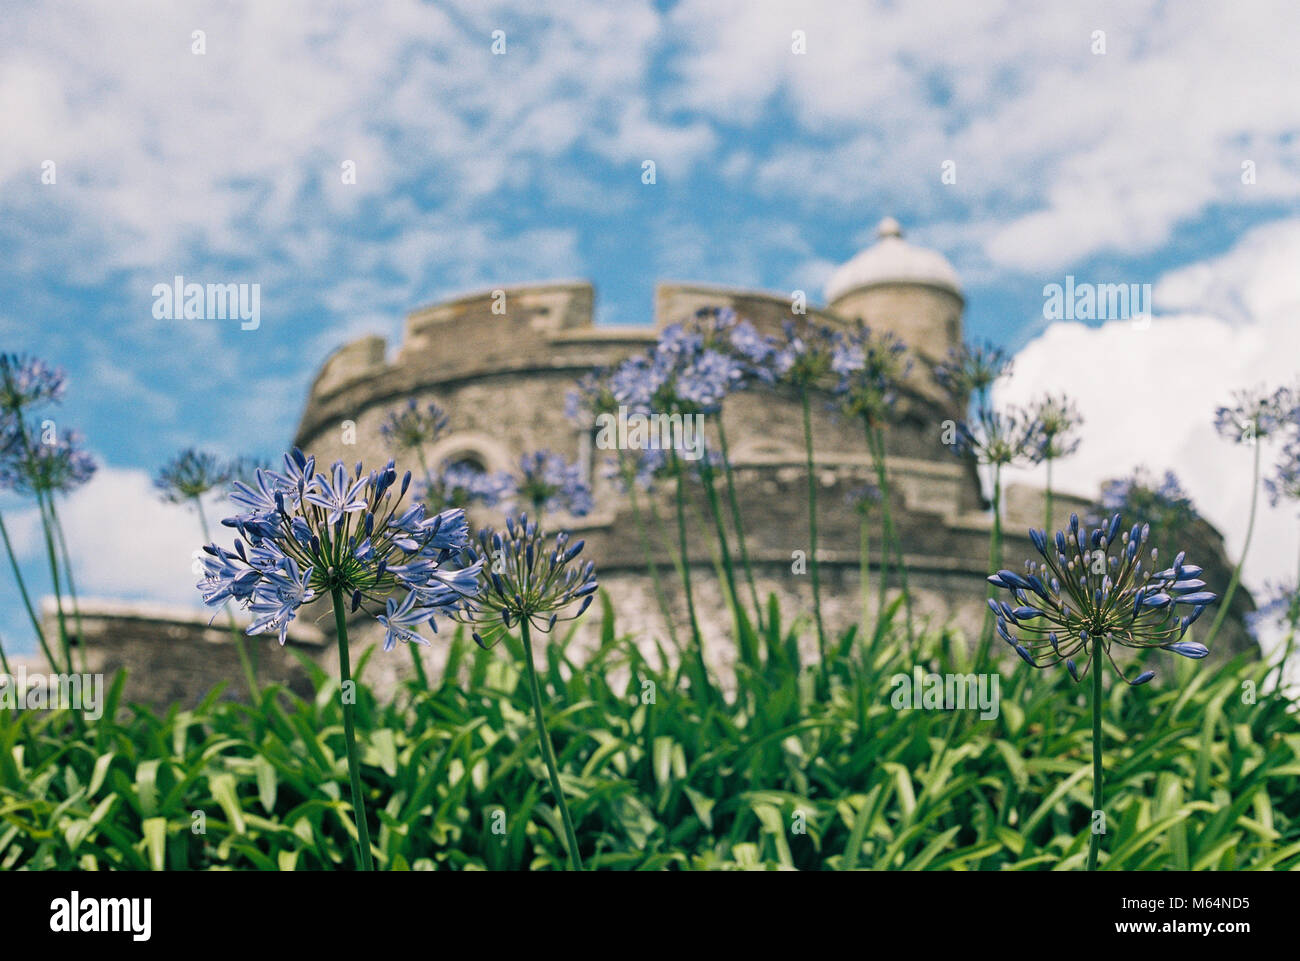 Flower bed growing in front of an old historic castle. Sunny day at St Mawes, England. Shallow depth of field to separate flowers from the background. Stock Photo